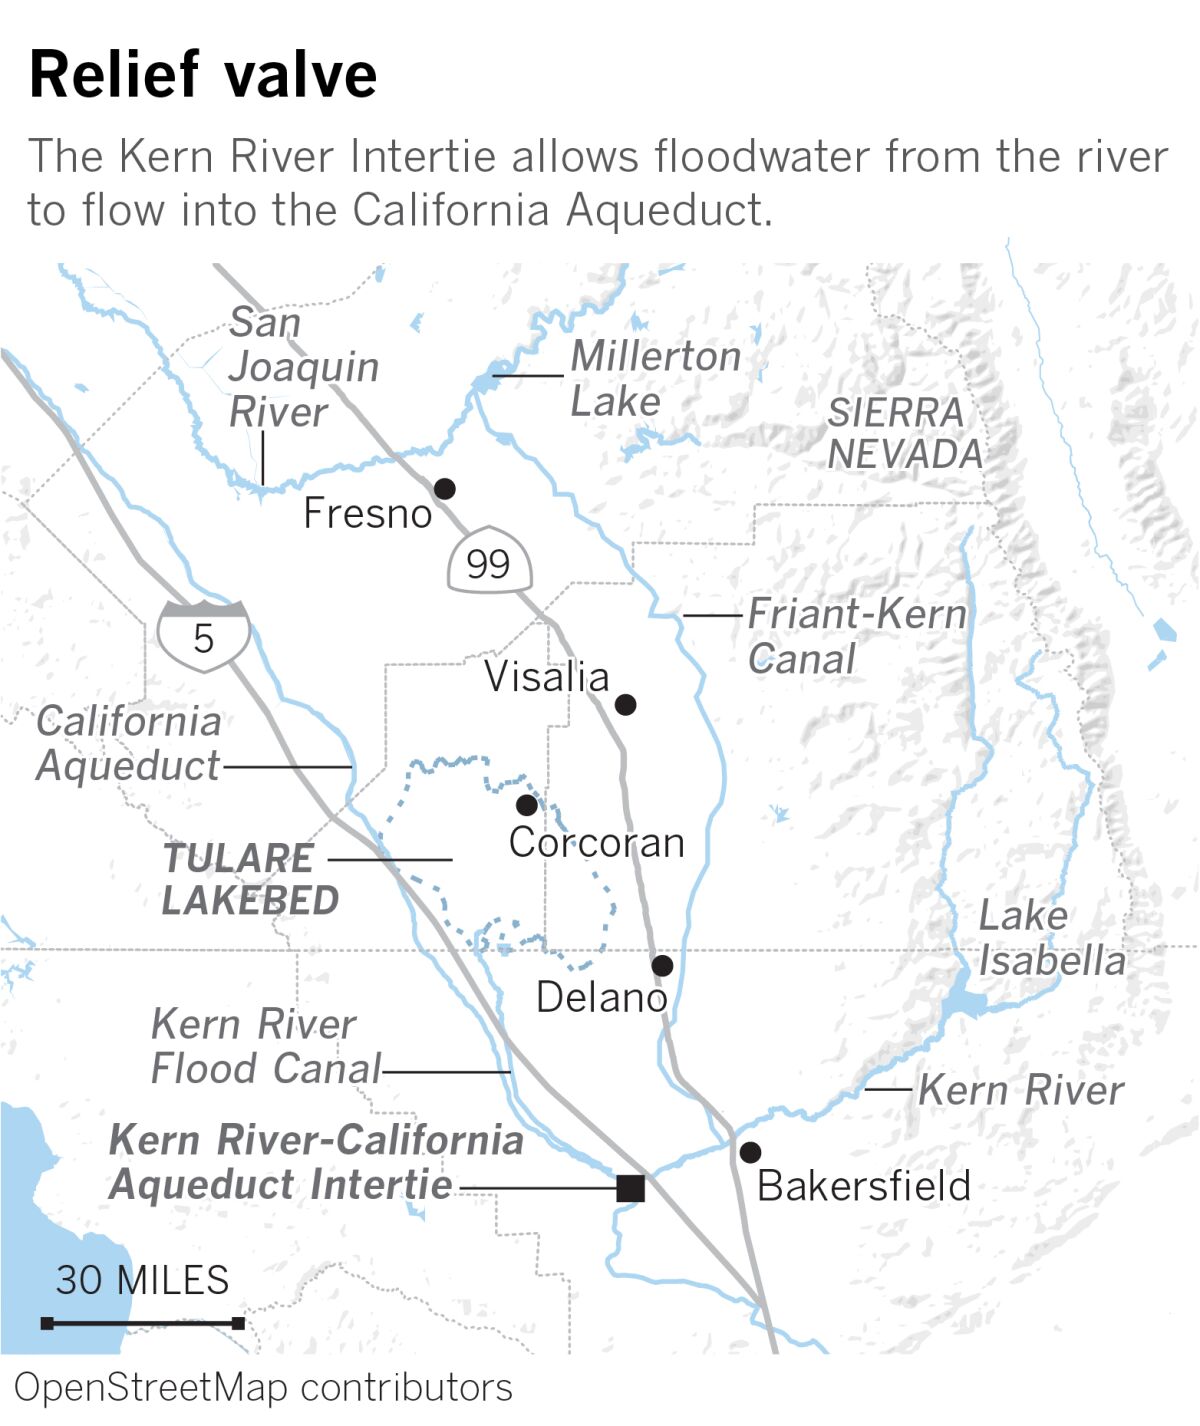 Locator of the Kern-California River Aqueduct Intersection.